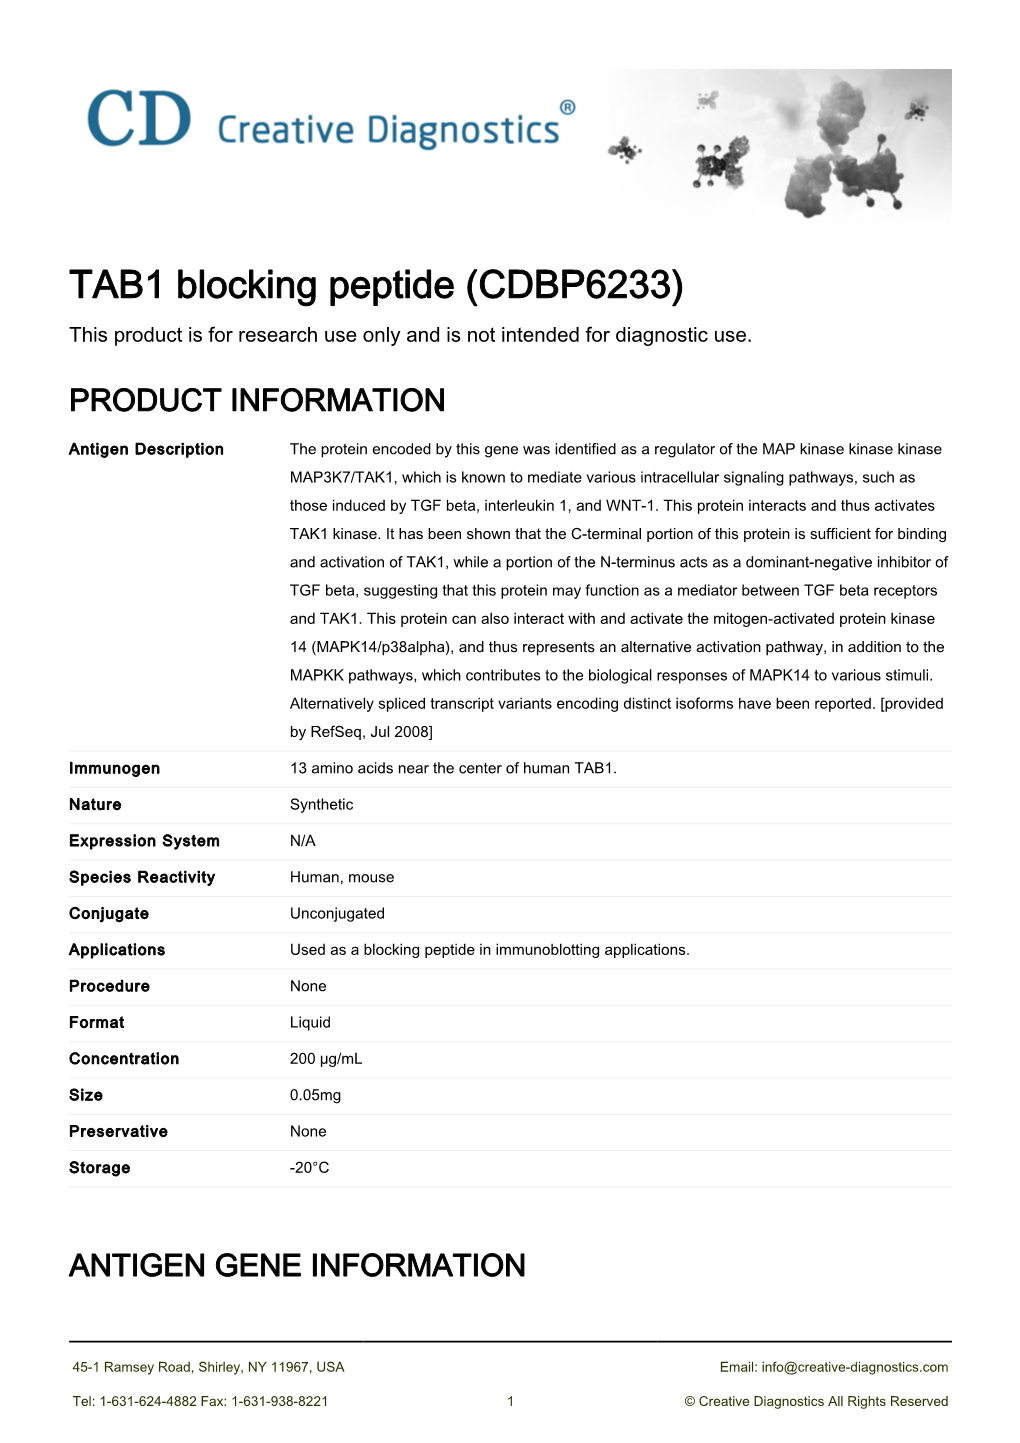 TAB1 Blocking Peptide (CDBP6233) This Product Is for Research Use Only and Is Not Intended for Diagnostic Use